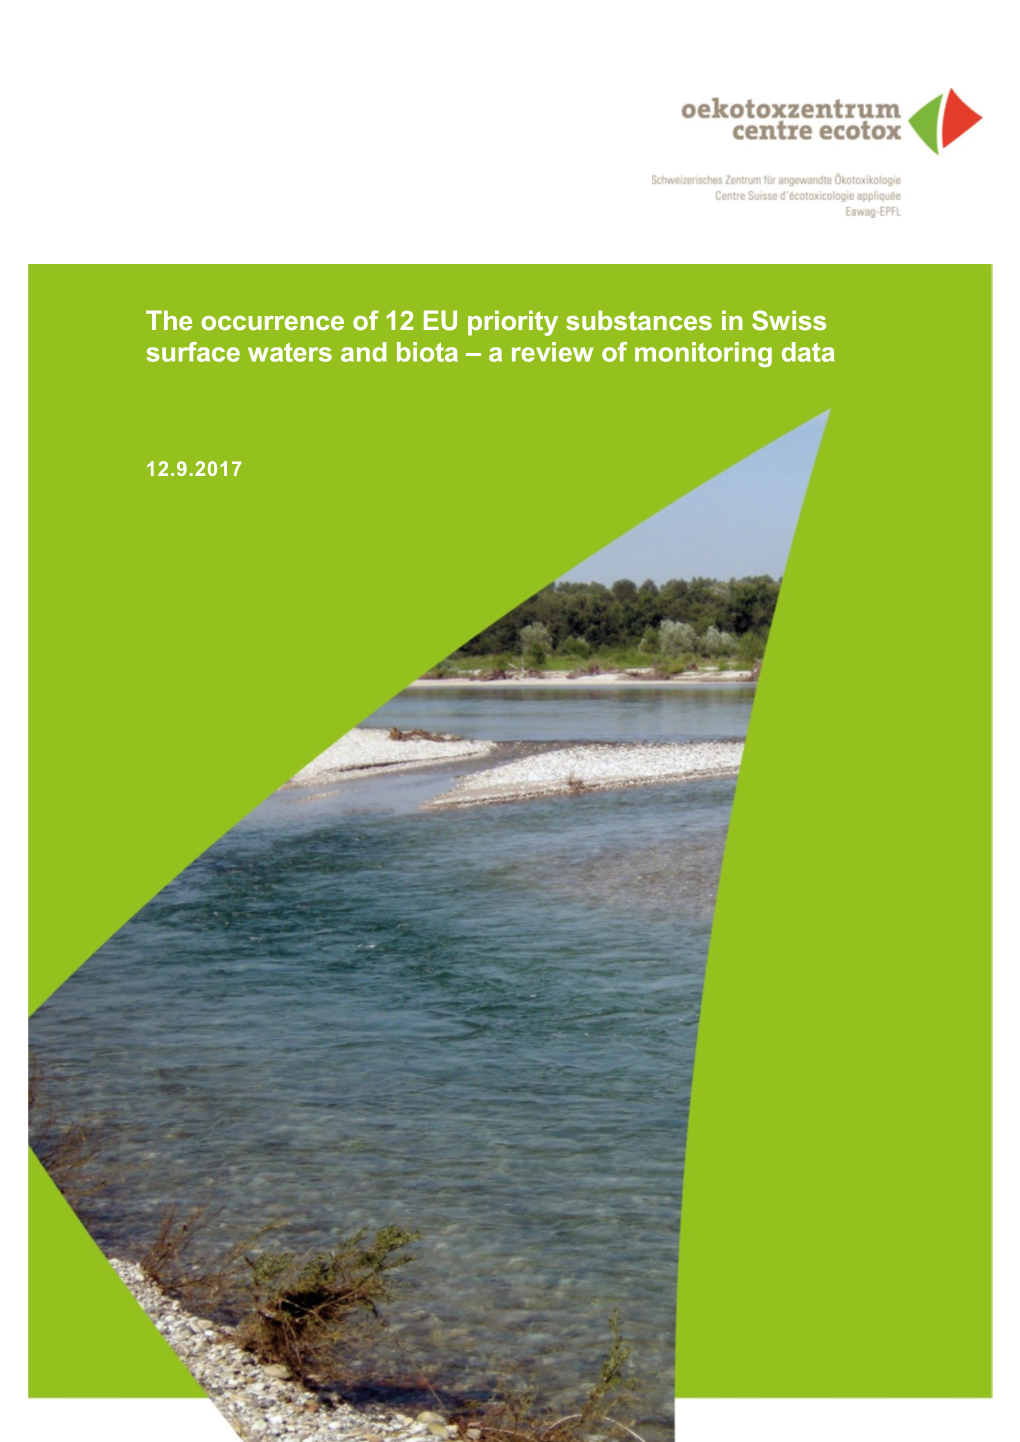 The Occurrence of 12 EU Priority Substances in Swiss Surface Waters and Biota – a Review of Monitoring Data